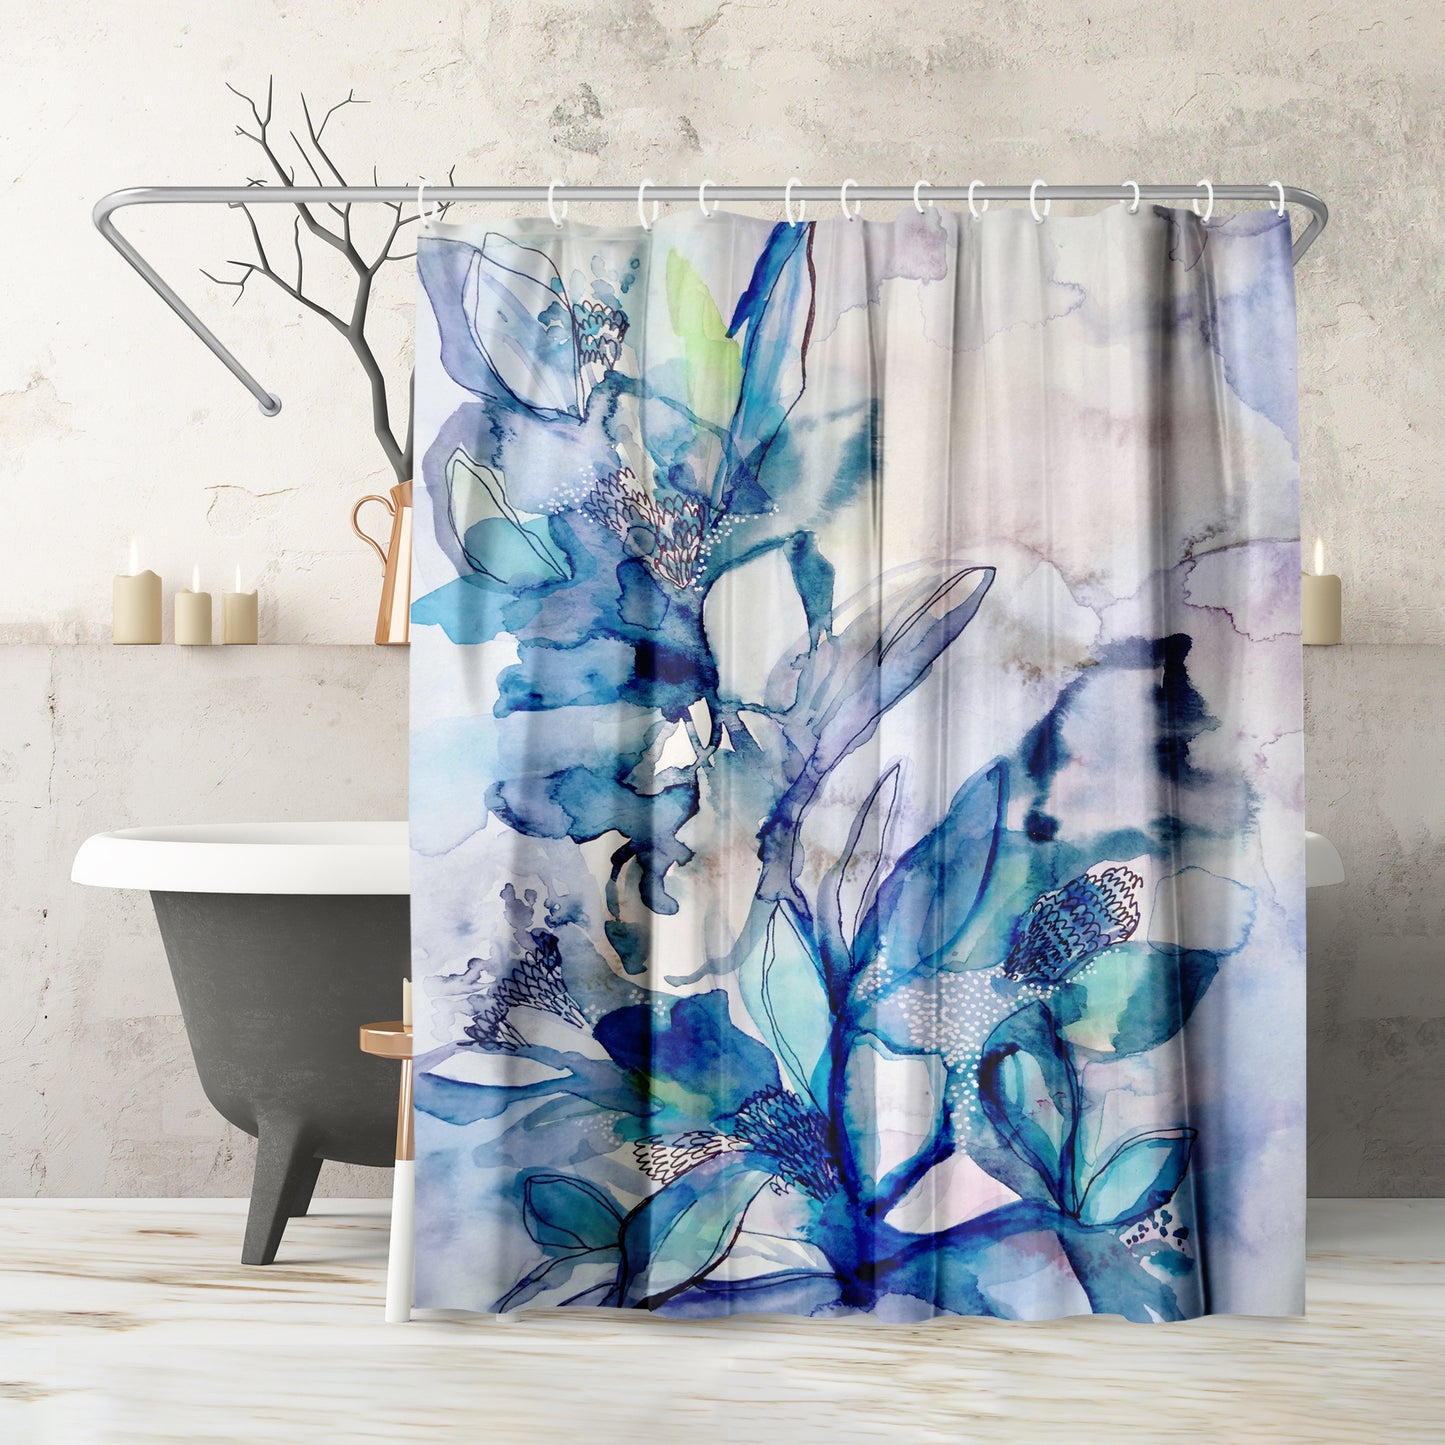 71" x 74" Abstract Shower Curtain with 12 Hooks, Aqua Floral by Hope Bainbridge